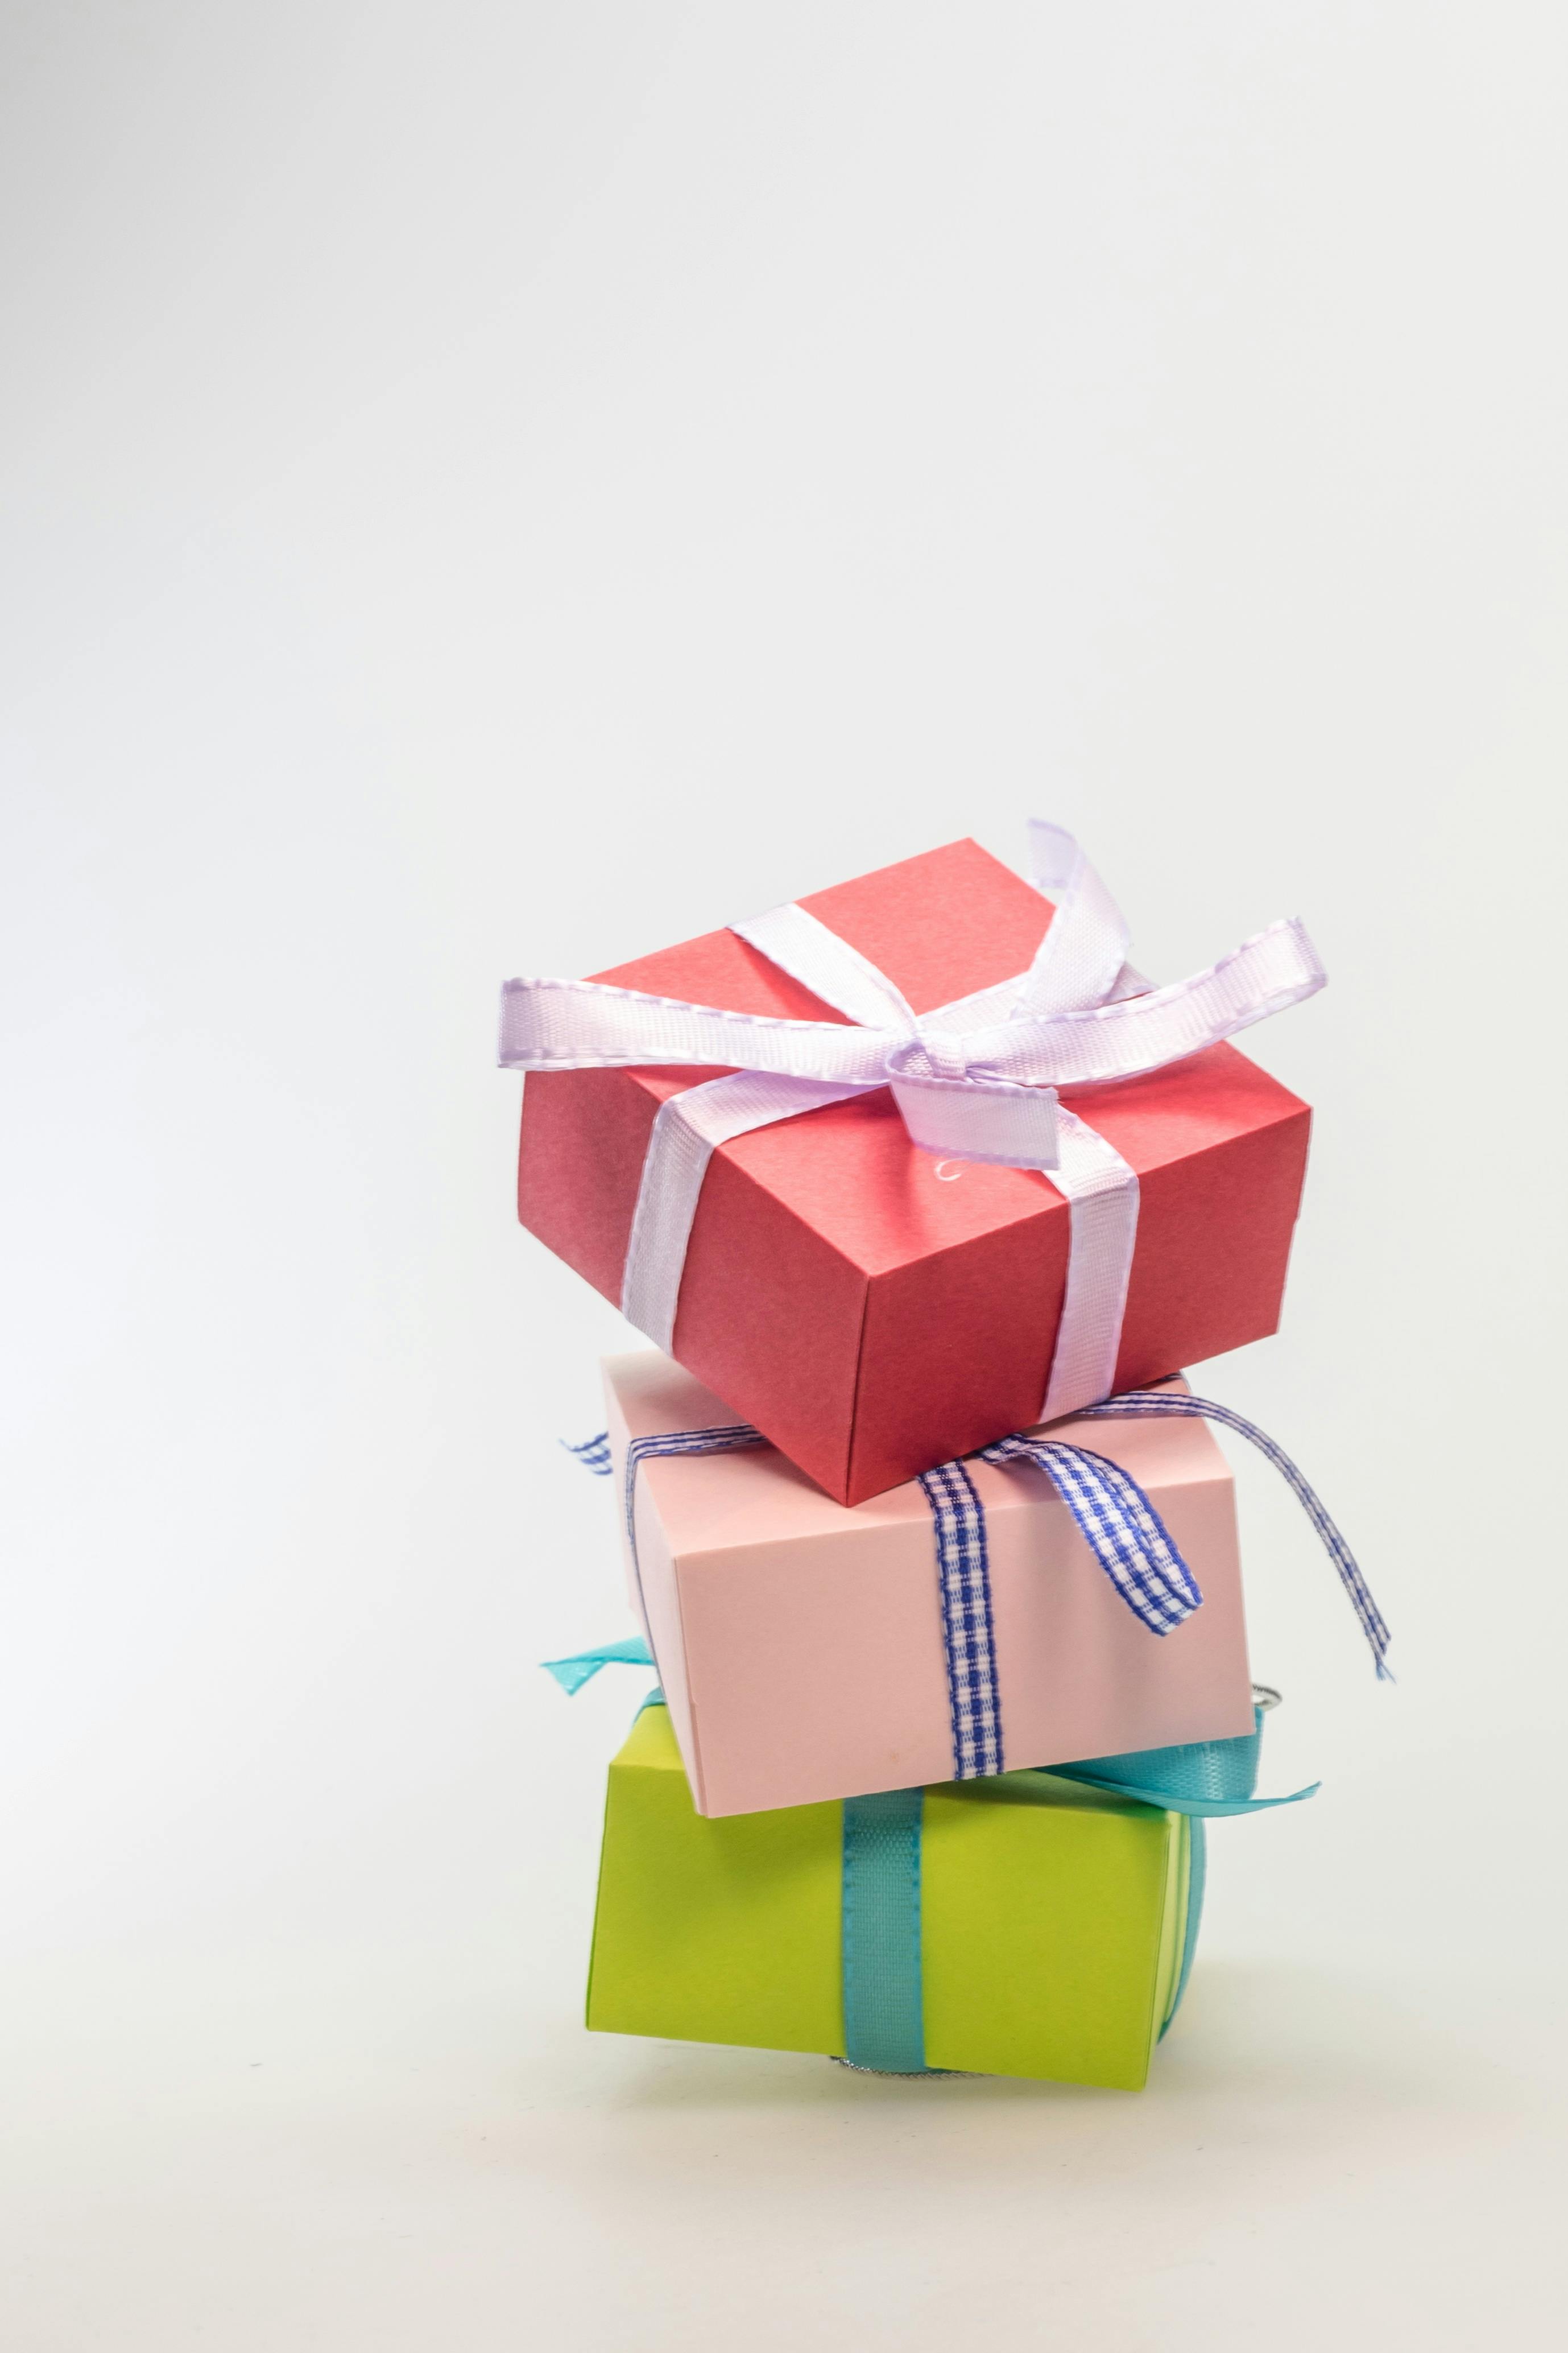 Gift Box Photos, Download The BEST Free Gift Box Stock Photos & HD